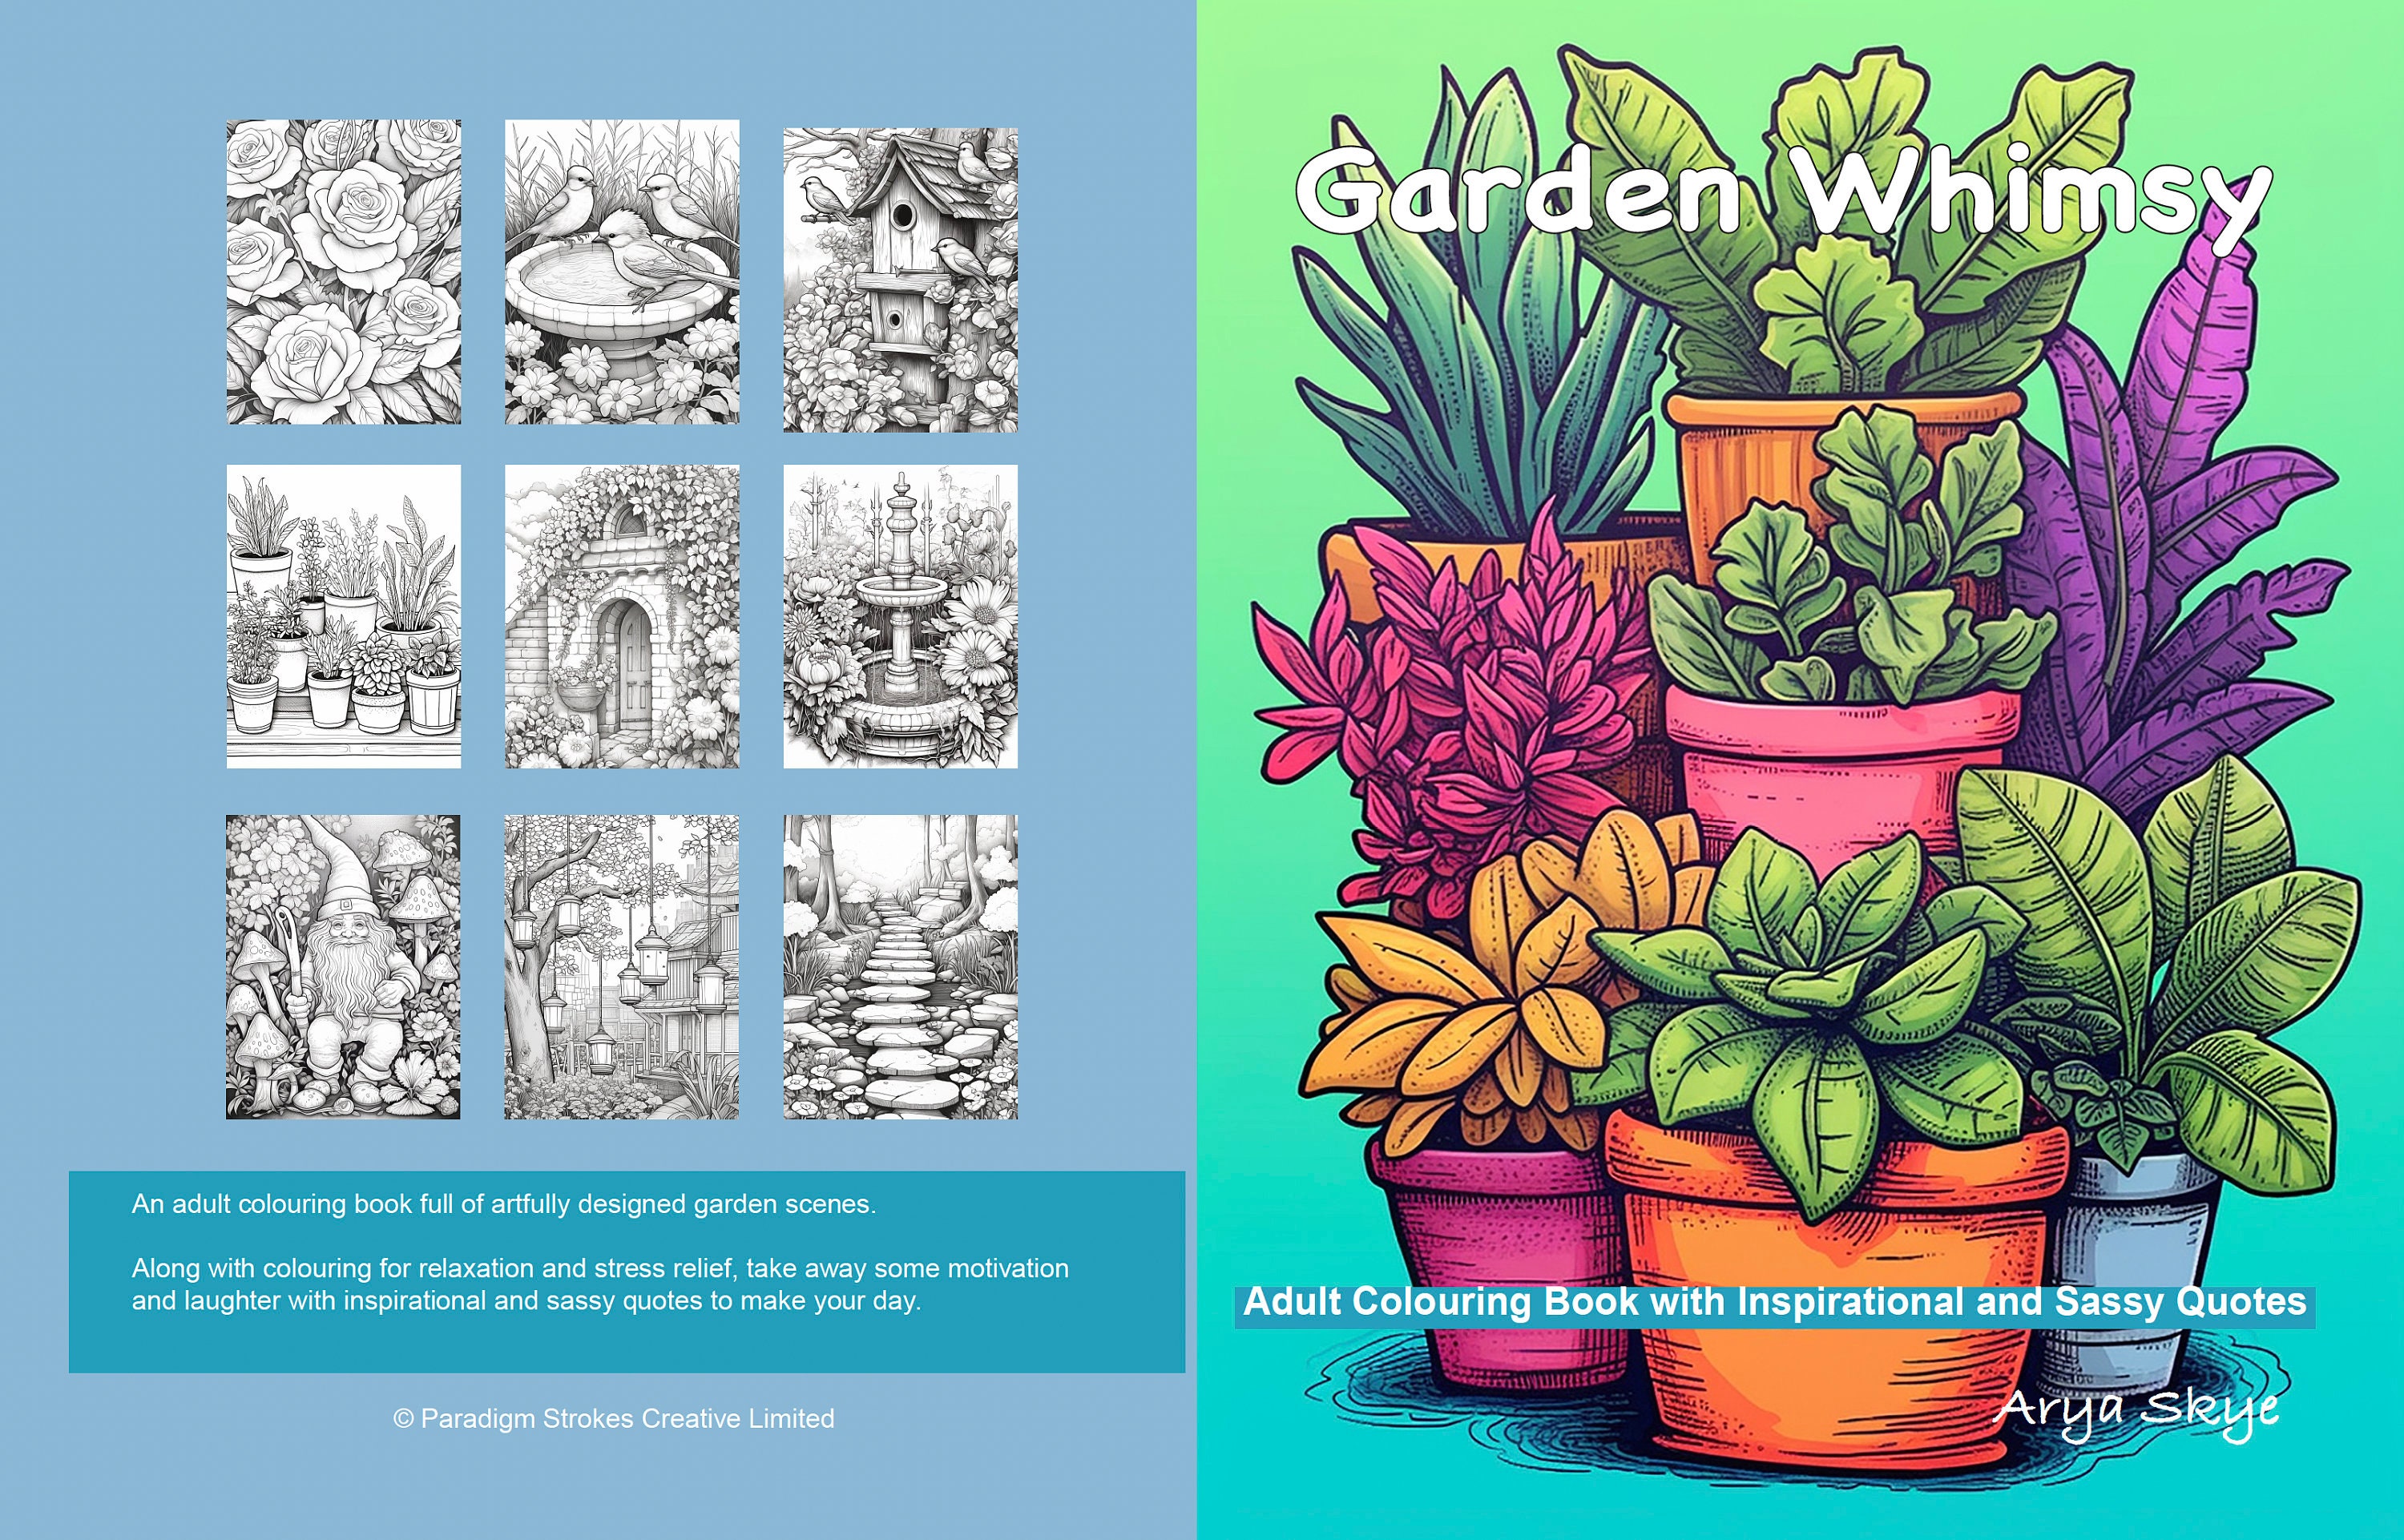 Stress Relief: Adult Coloring Book with Animals, Landscape, Flowers, Patterns, Mushroom and Many More for Relaxation